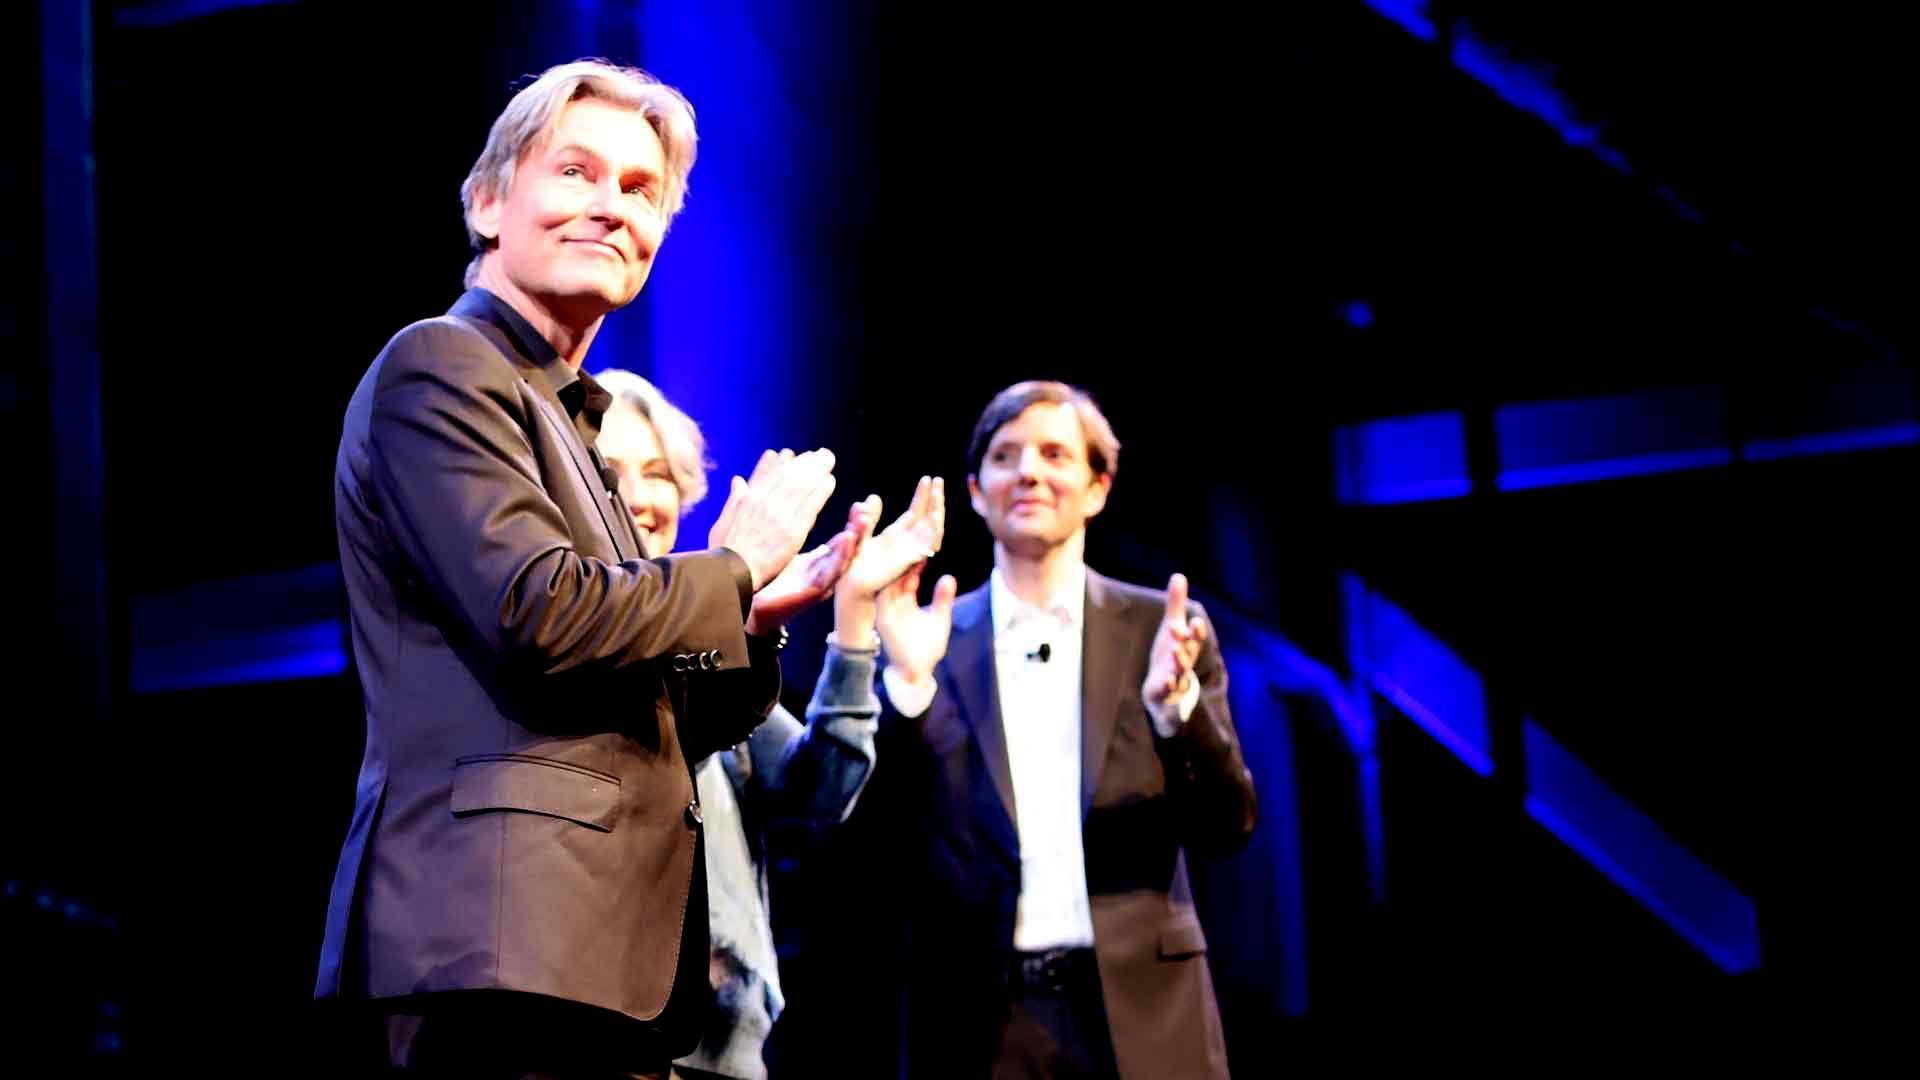 Esa-Pekka Salonen accepts his appointment as new Music Director of the San Francisco Symphony at a welcome party, Dec. 5, 2018. Gabe Meline/KQED